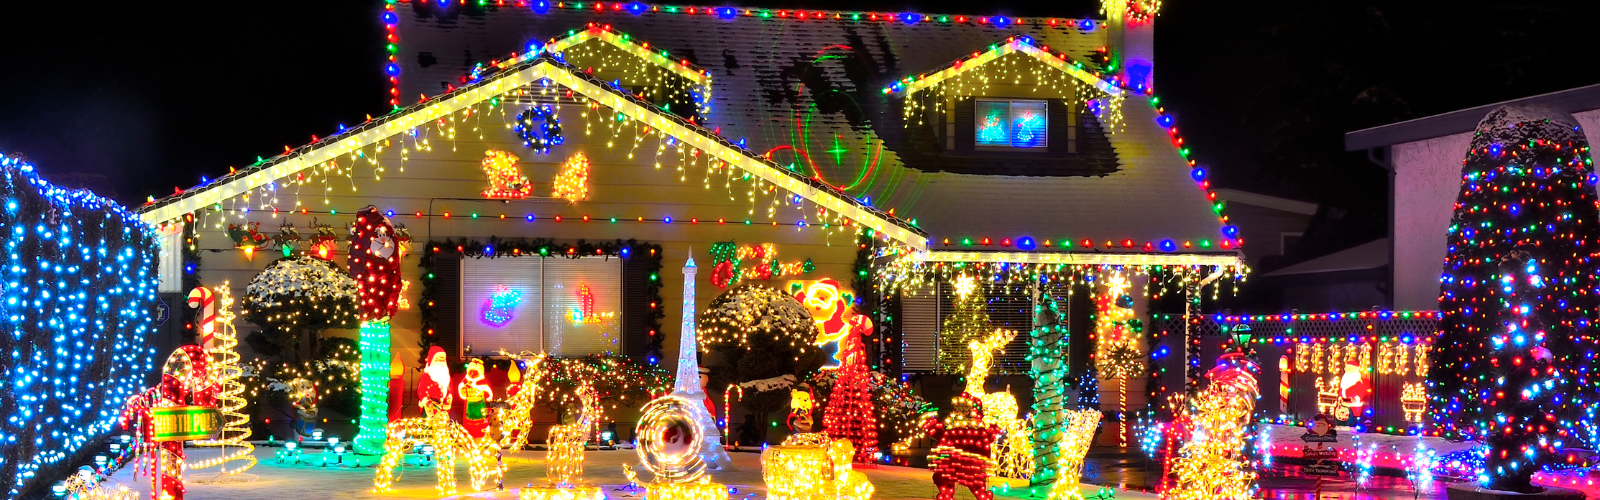 Christmas lights on house electrical safety